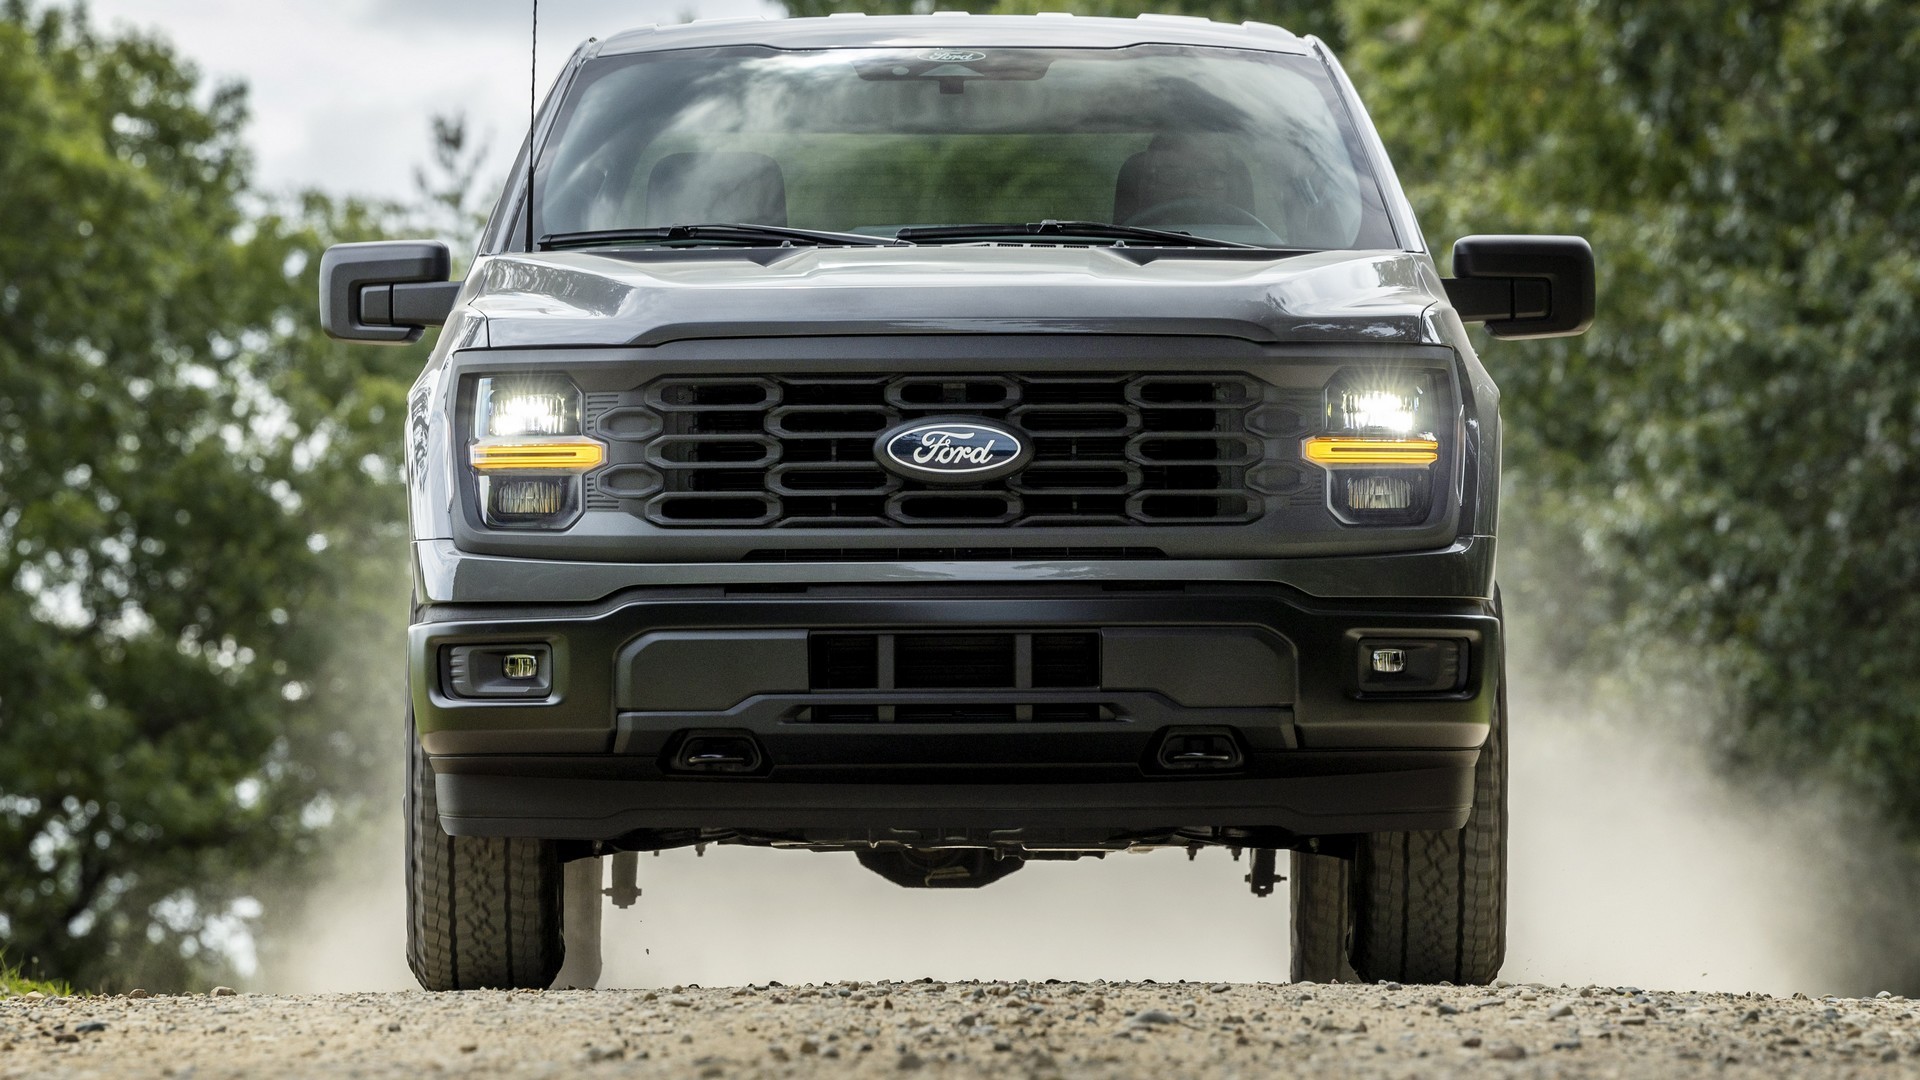 Ford Blue Oval Logo Has Changed: F-150 Debuts a Simpler Version